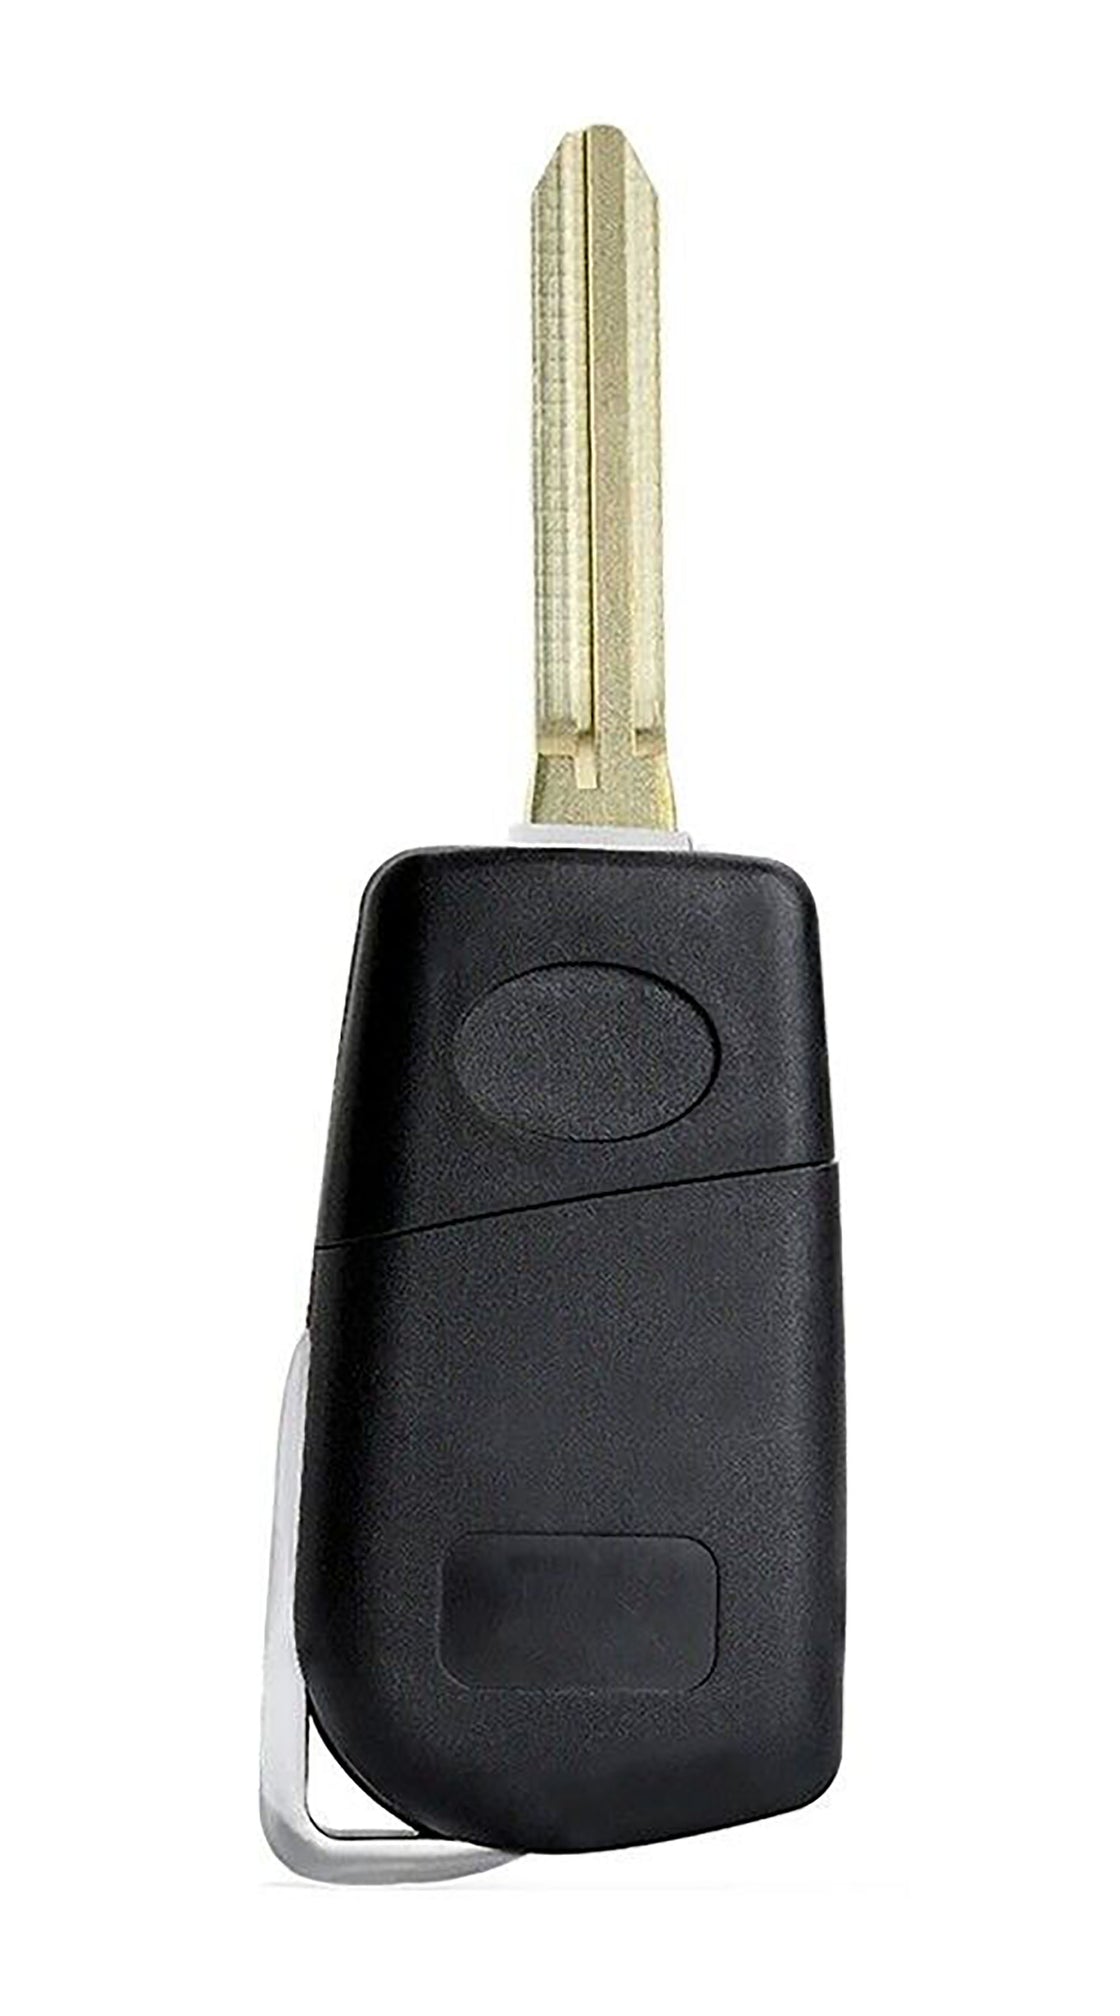 1x New Replacement Transponder Key Remote Compatible with & Fit For Toyota Dot chip - TOY44D-PT-C-TOY-10